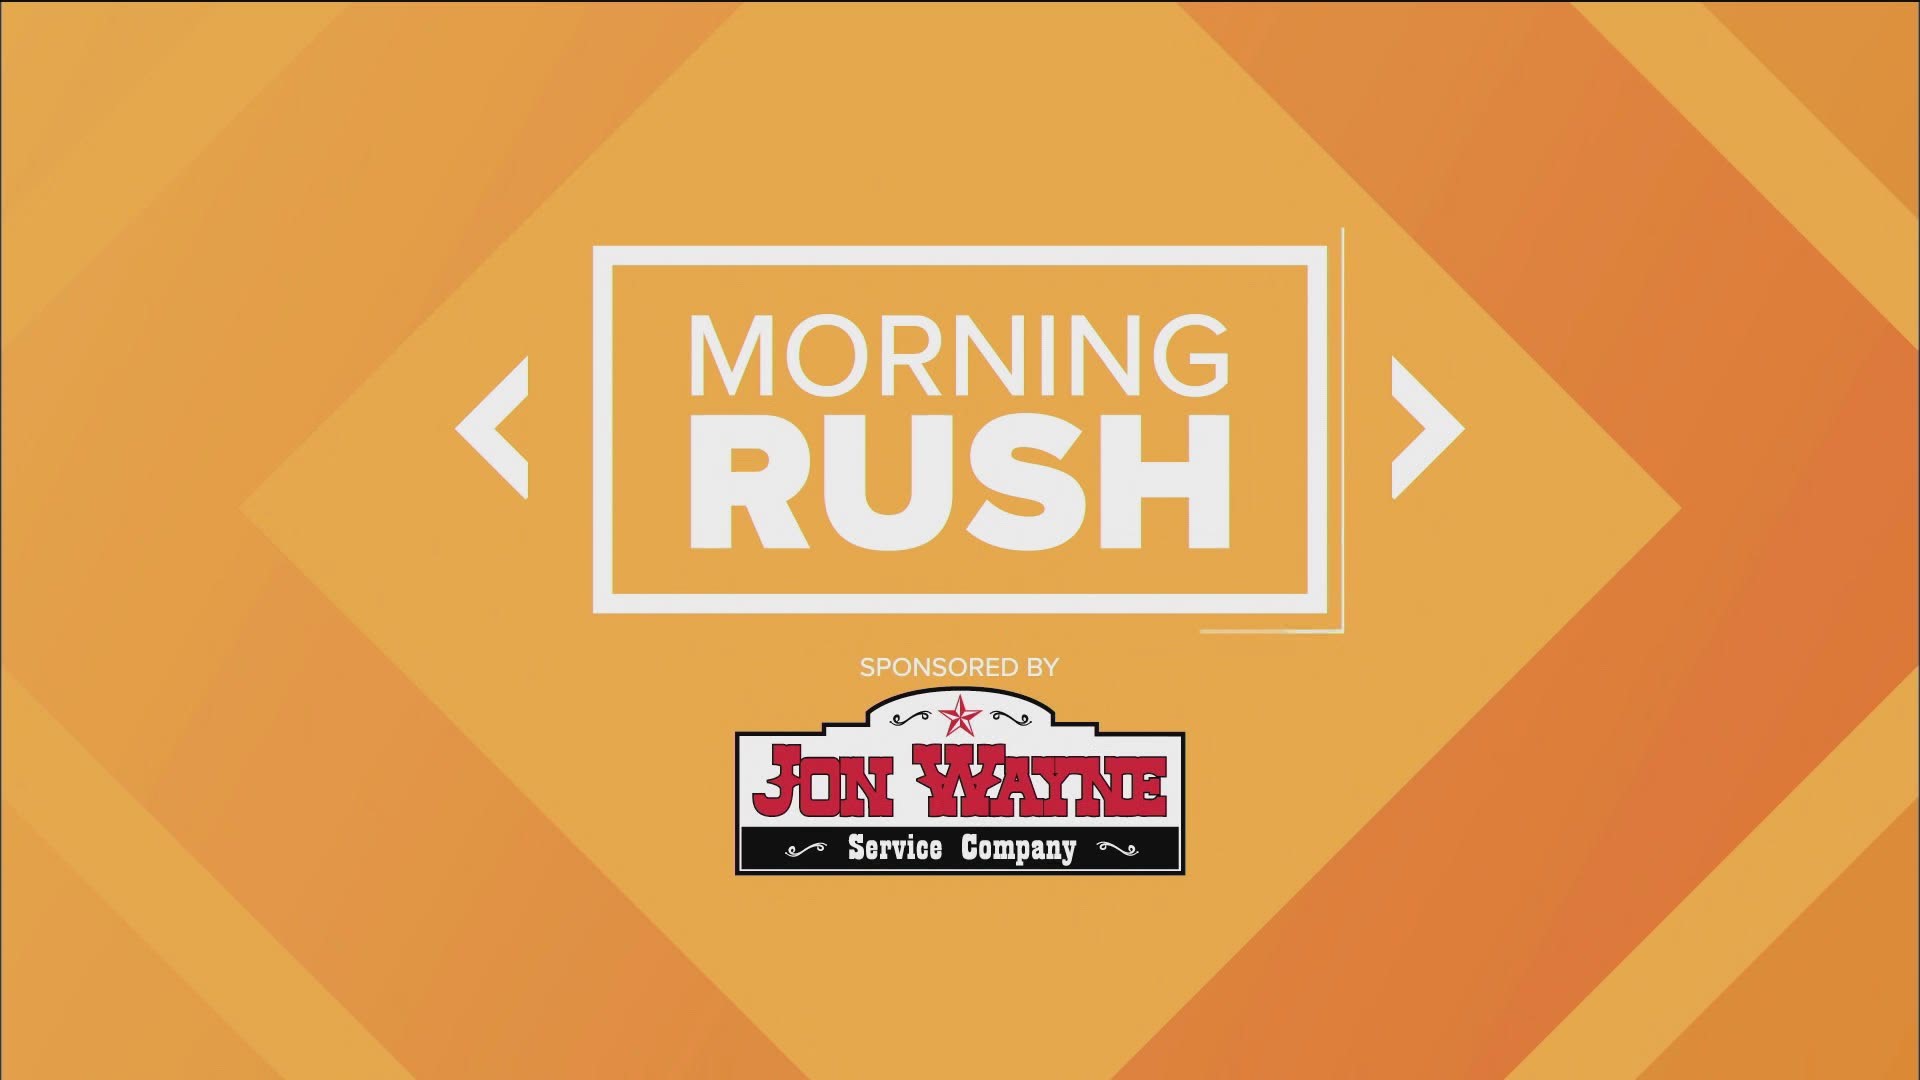 In today's Morning Rush, we're getting you caught up on everything you need to know before you start your day.